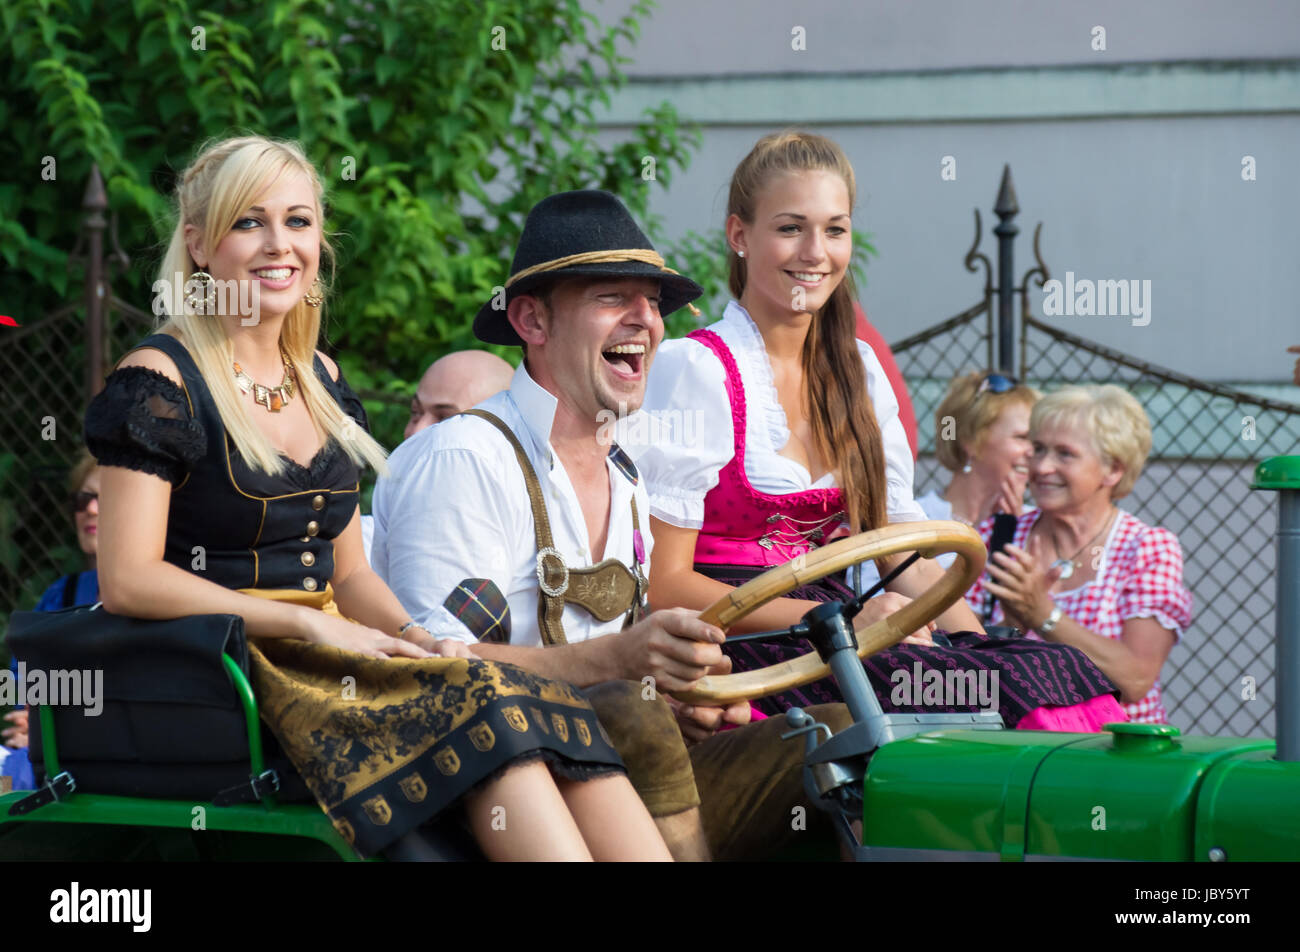 VILLACH, AUSTRIA - AUGUST 4: Participants riding a tractor at the procession of 'Villacher Kirchtag', the largest traditional folk festival in Austria, August 4, 2012 in Villach, Austria. Stock Photo